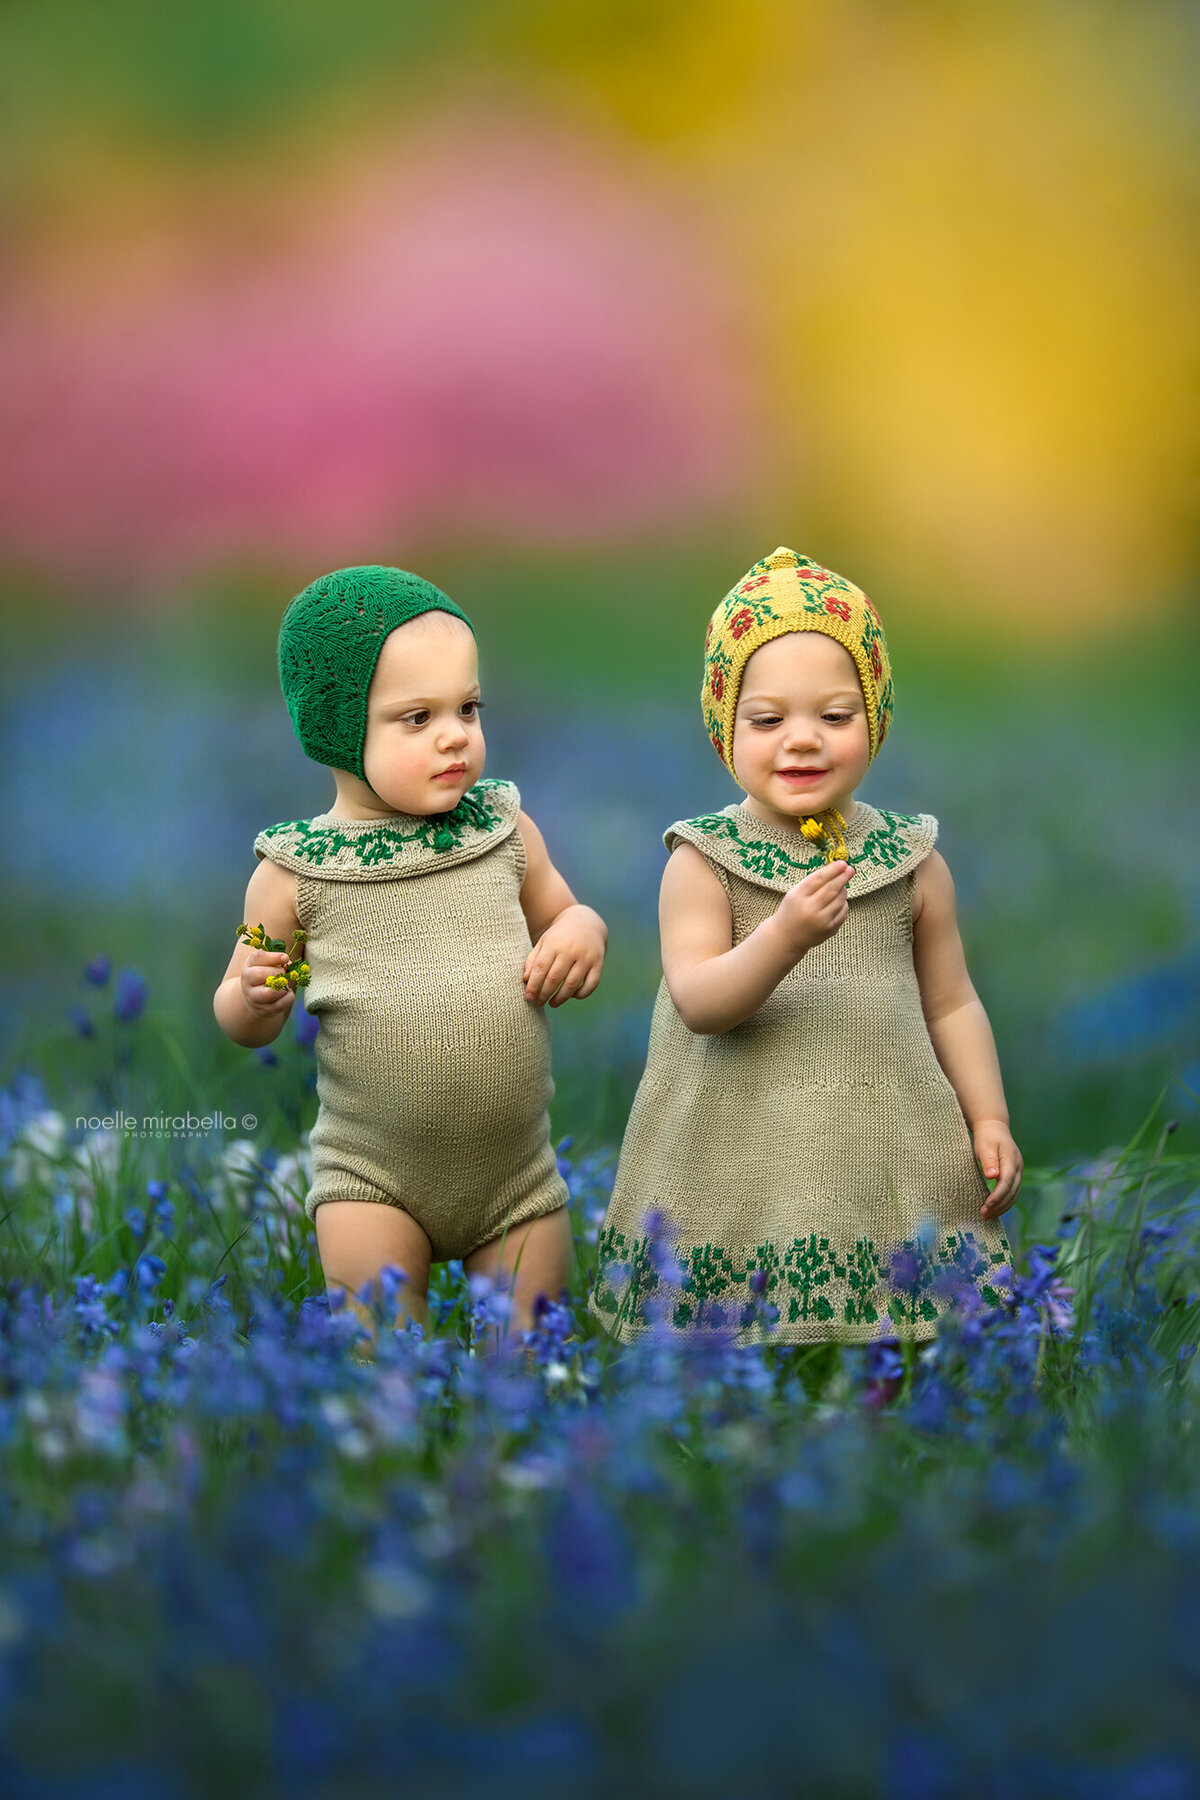 Twin baby girls playing with bluebell flowers in a field of bluebells.